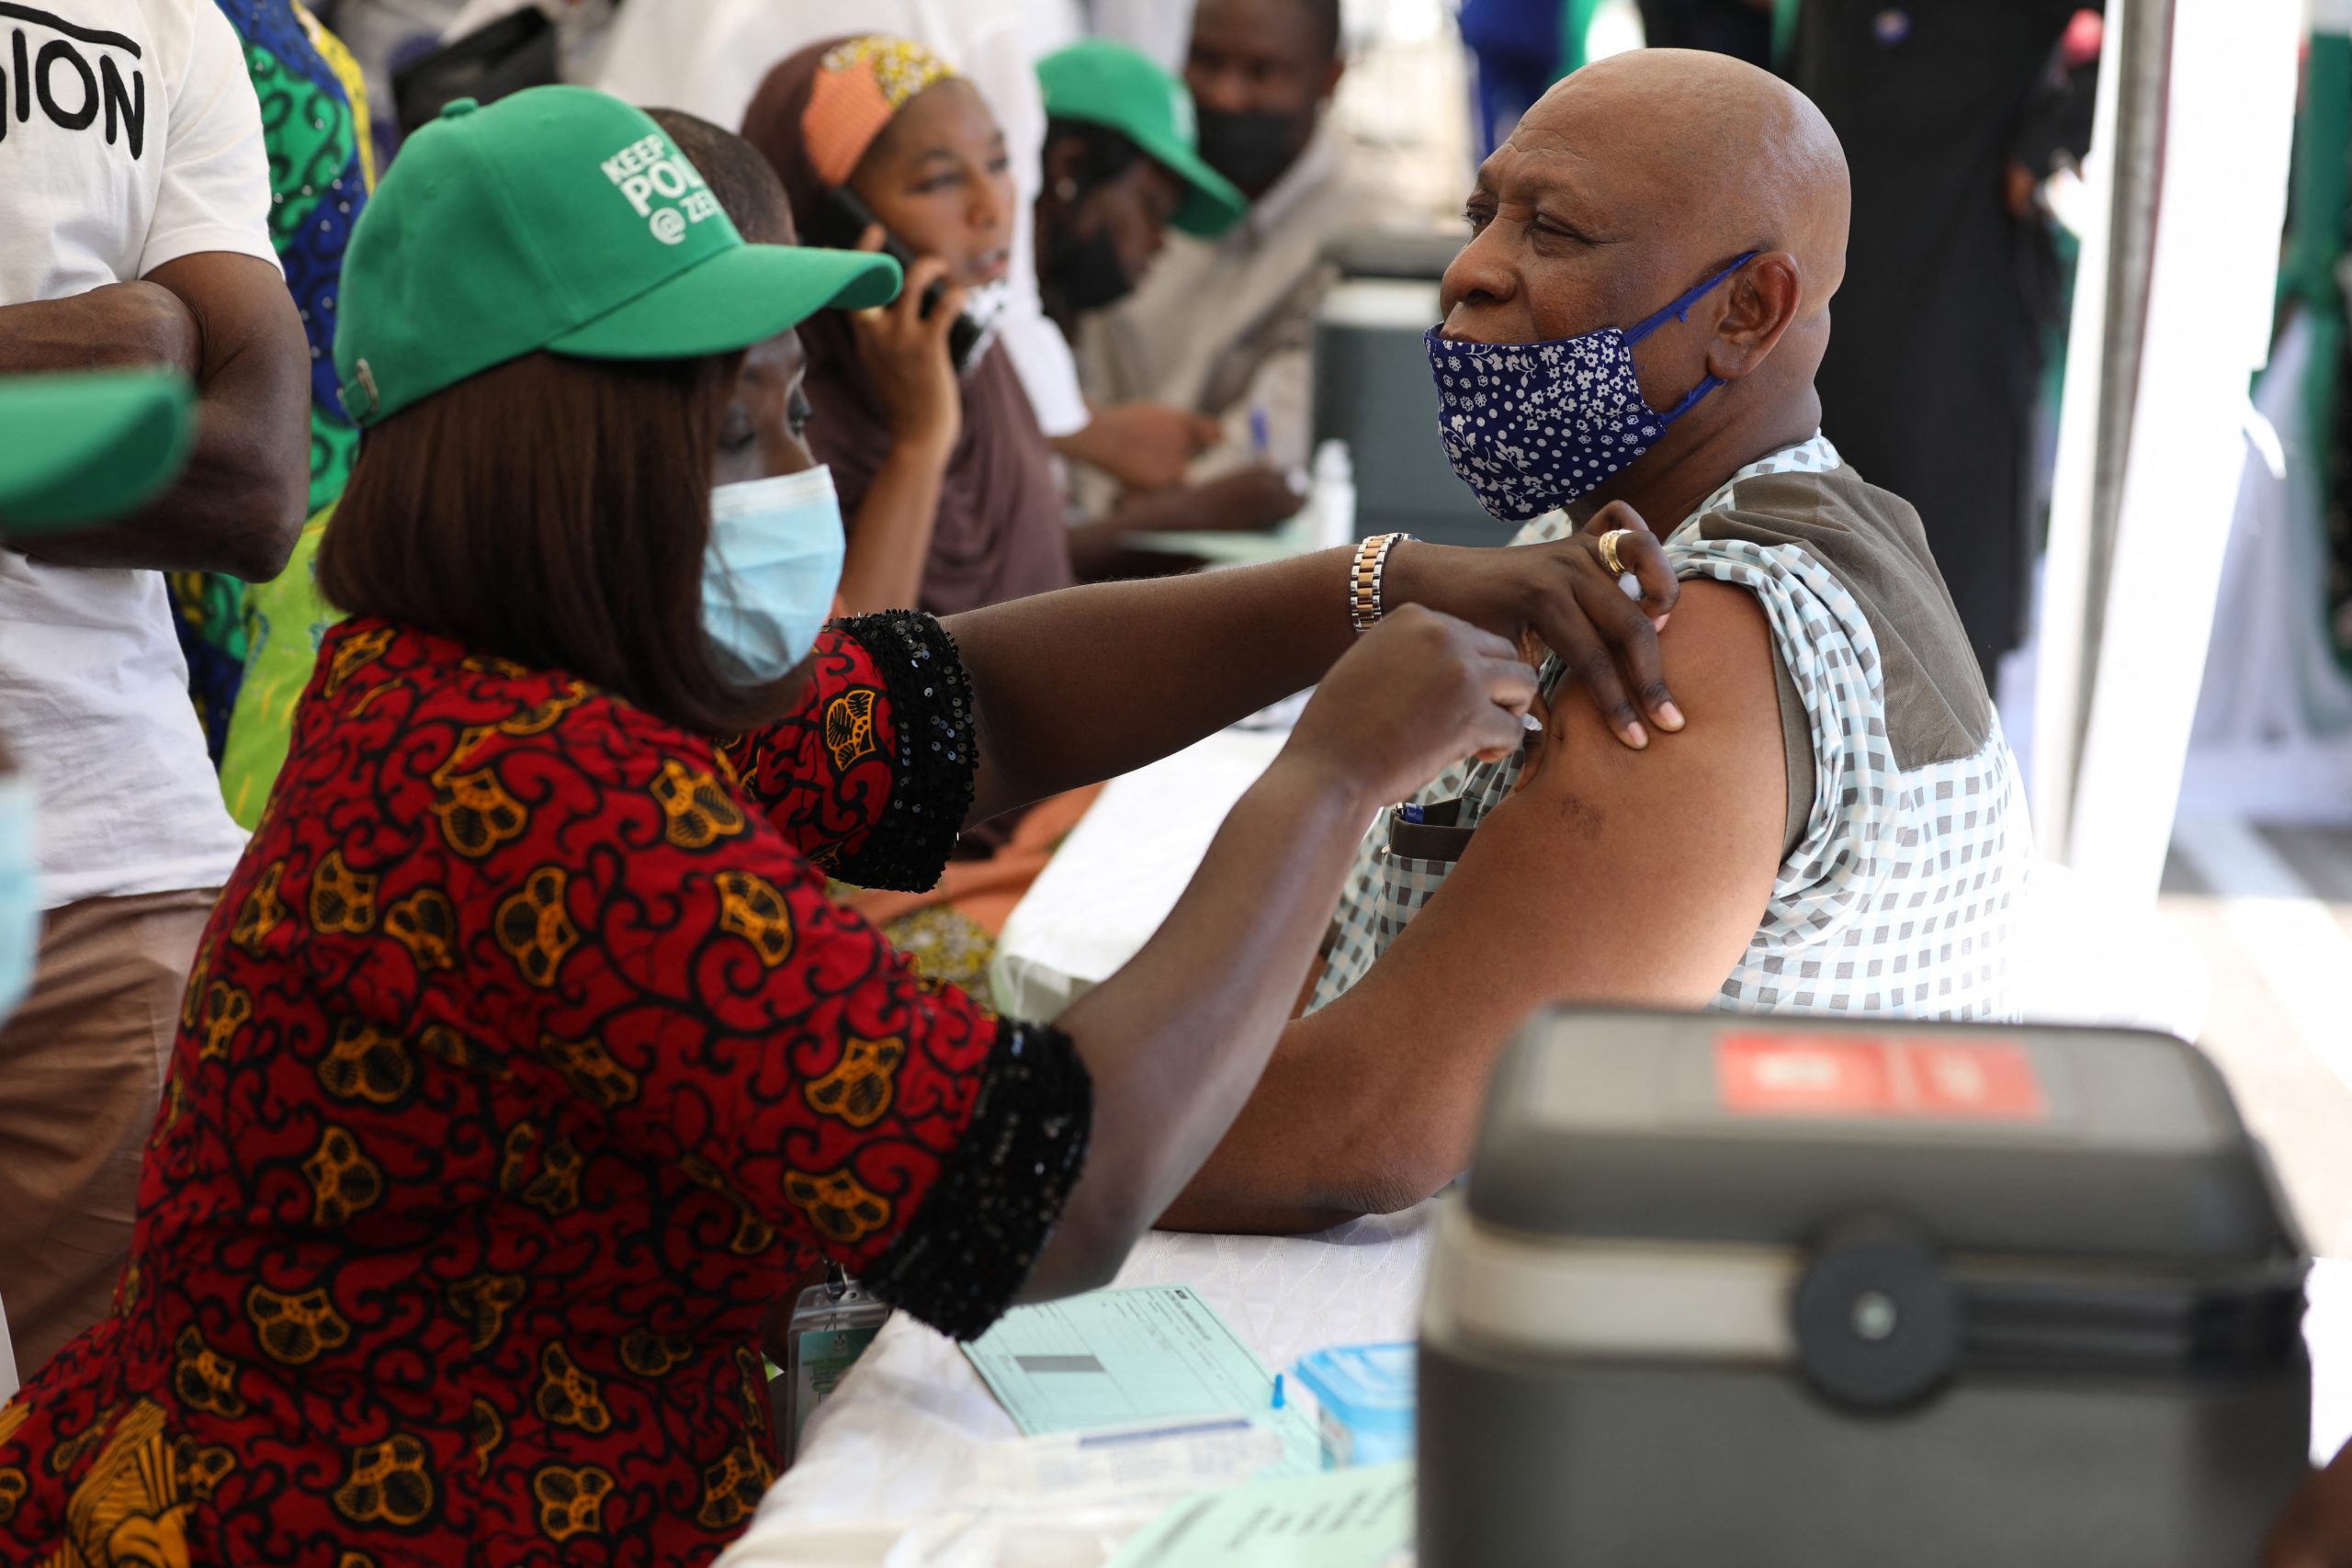 Nigerian News Update: COVID-19: Dec 1 deadline: Only 3% eligible Nigerians fully vaccinated